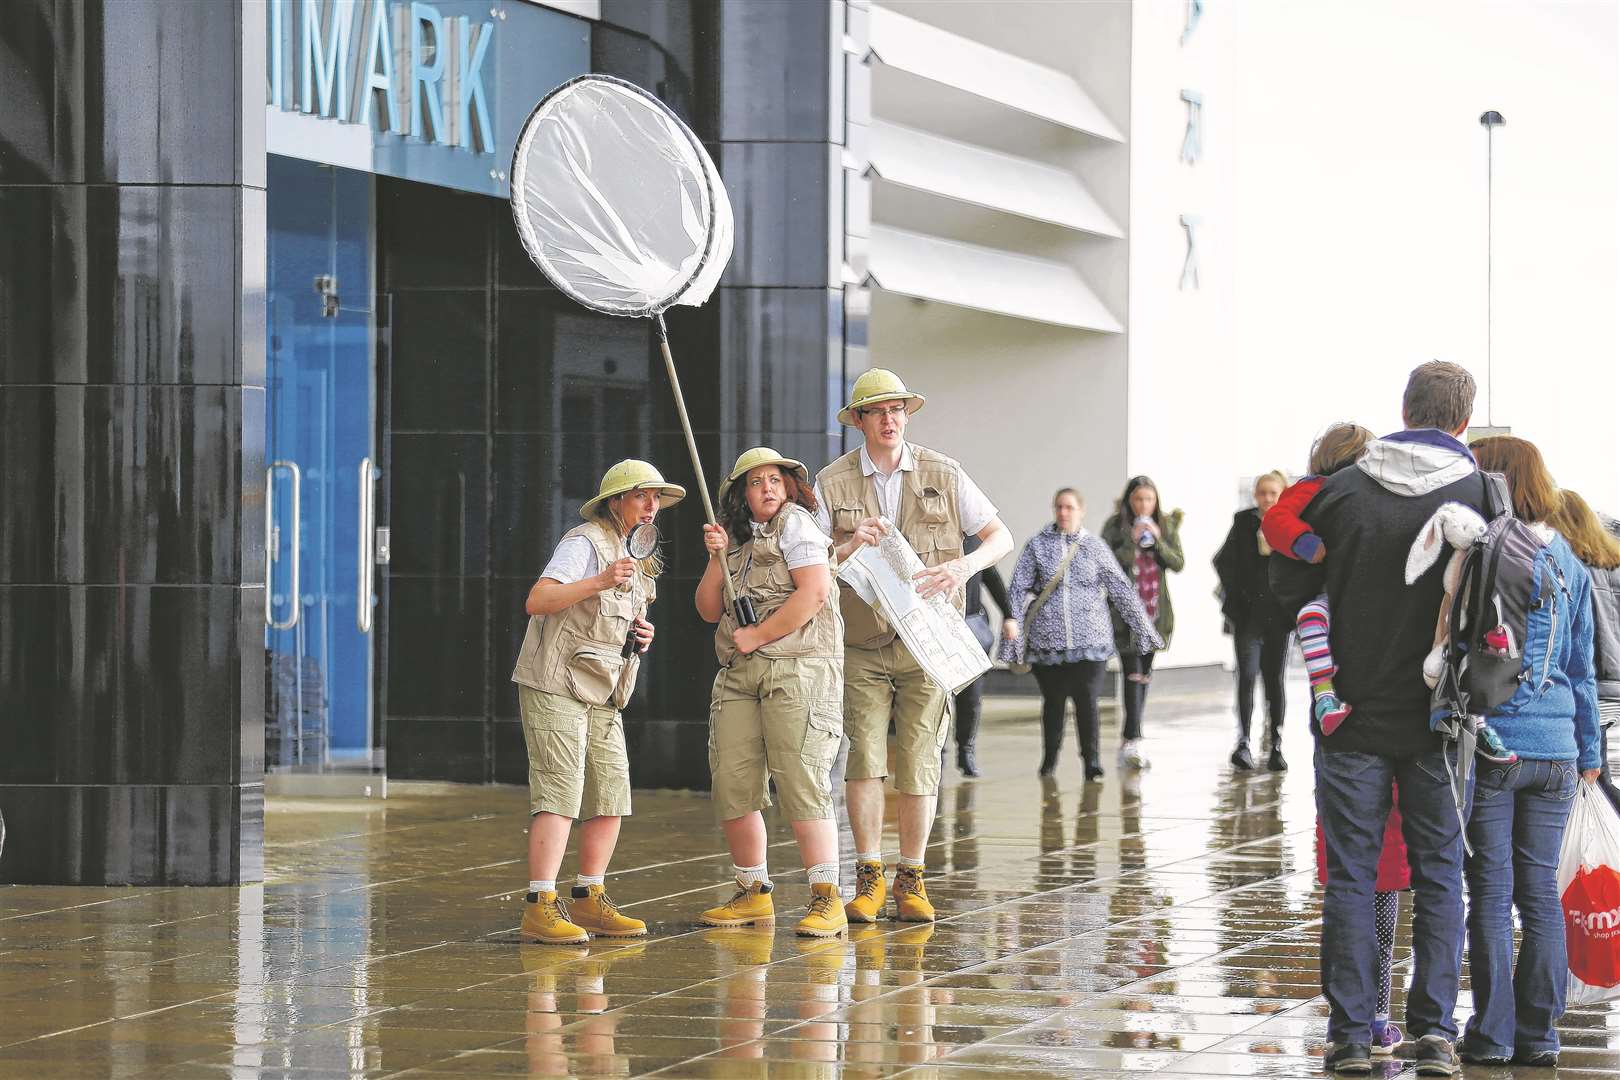 A team of eccentric explorers performing skits and engaging with shoppers